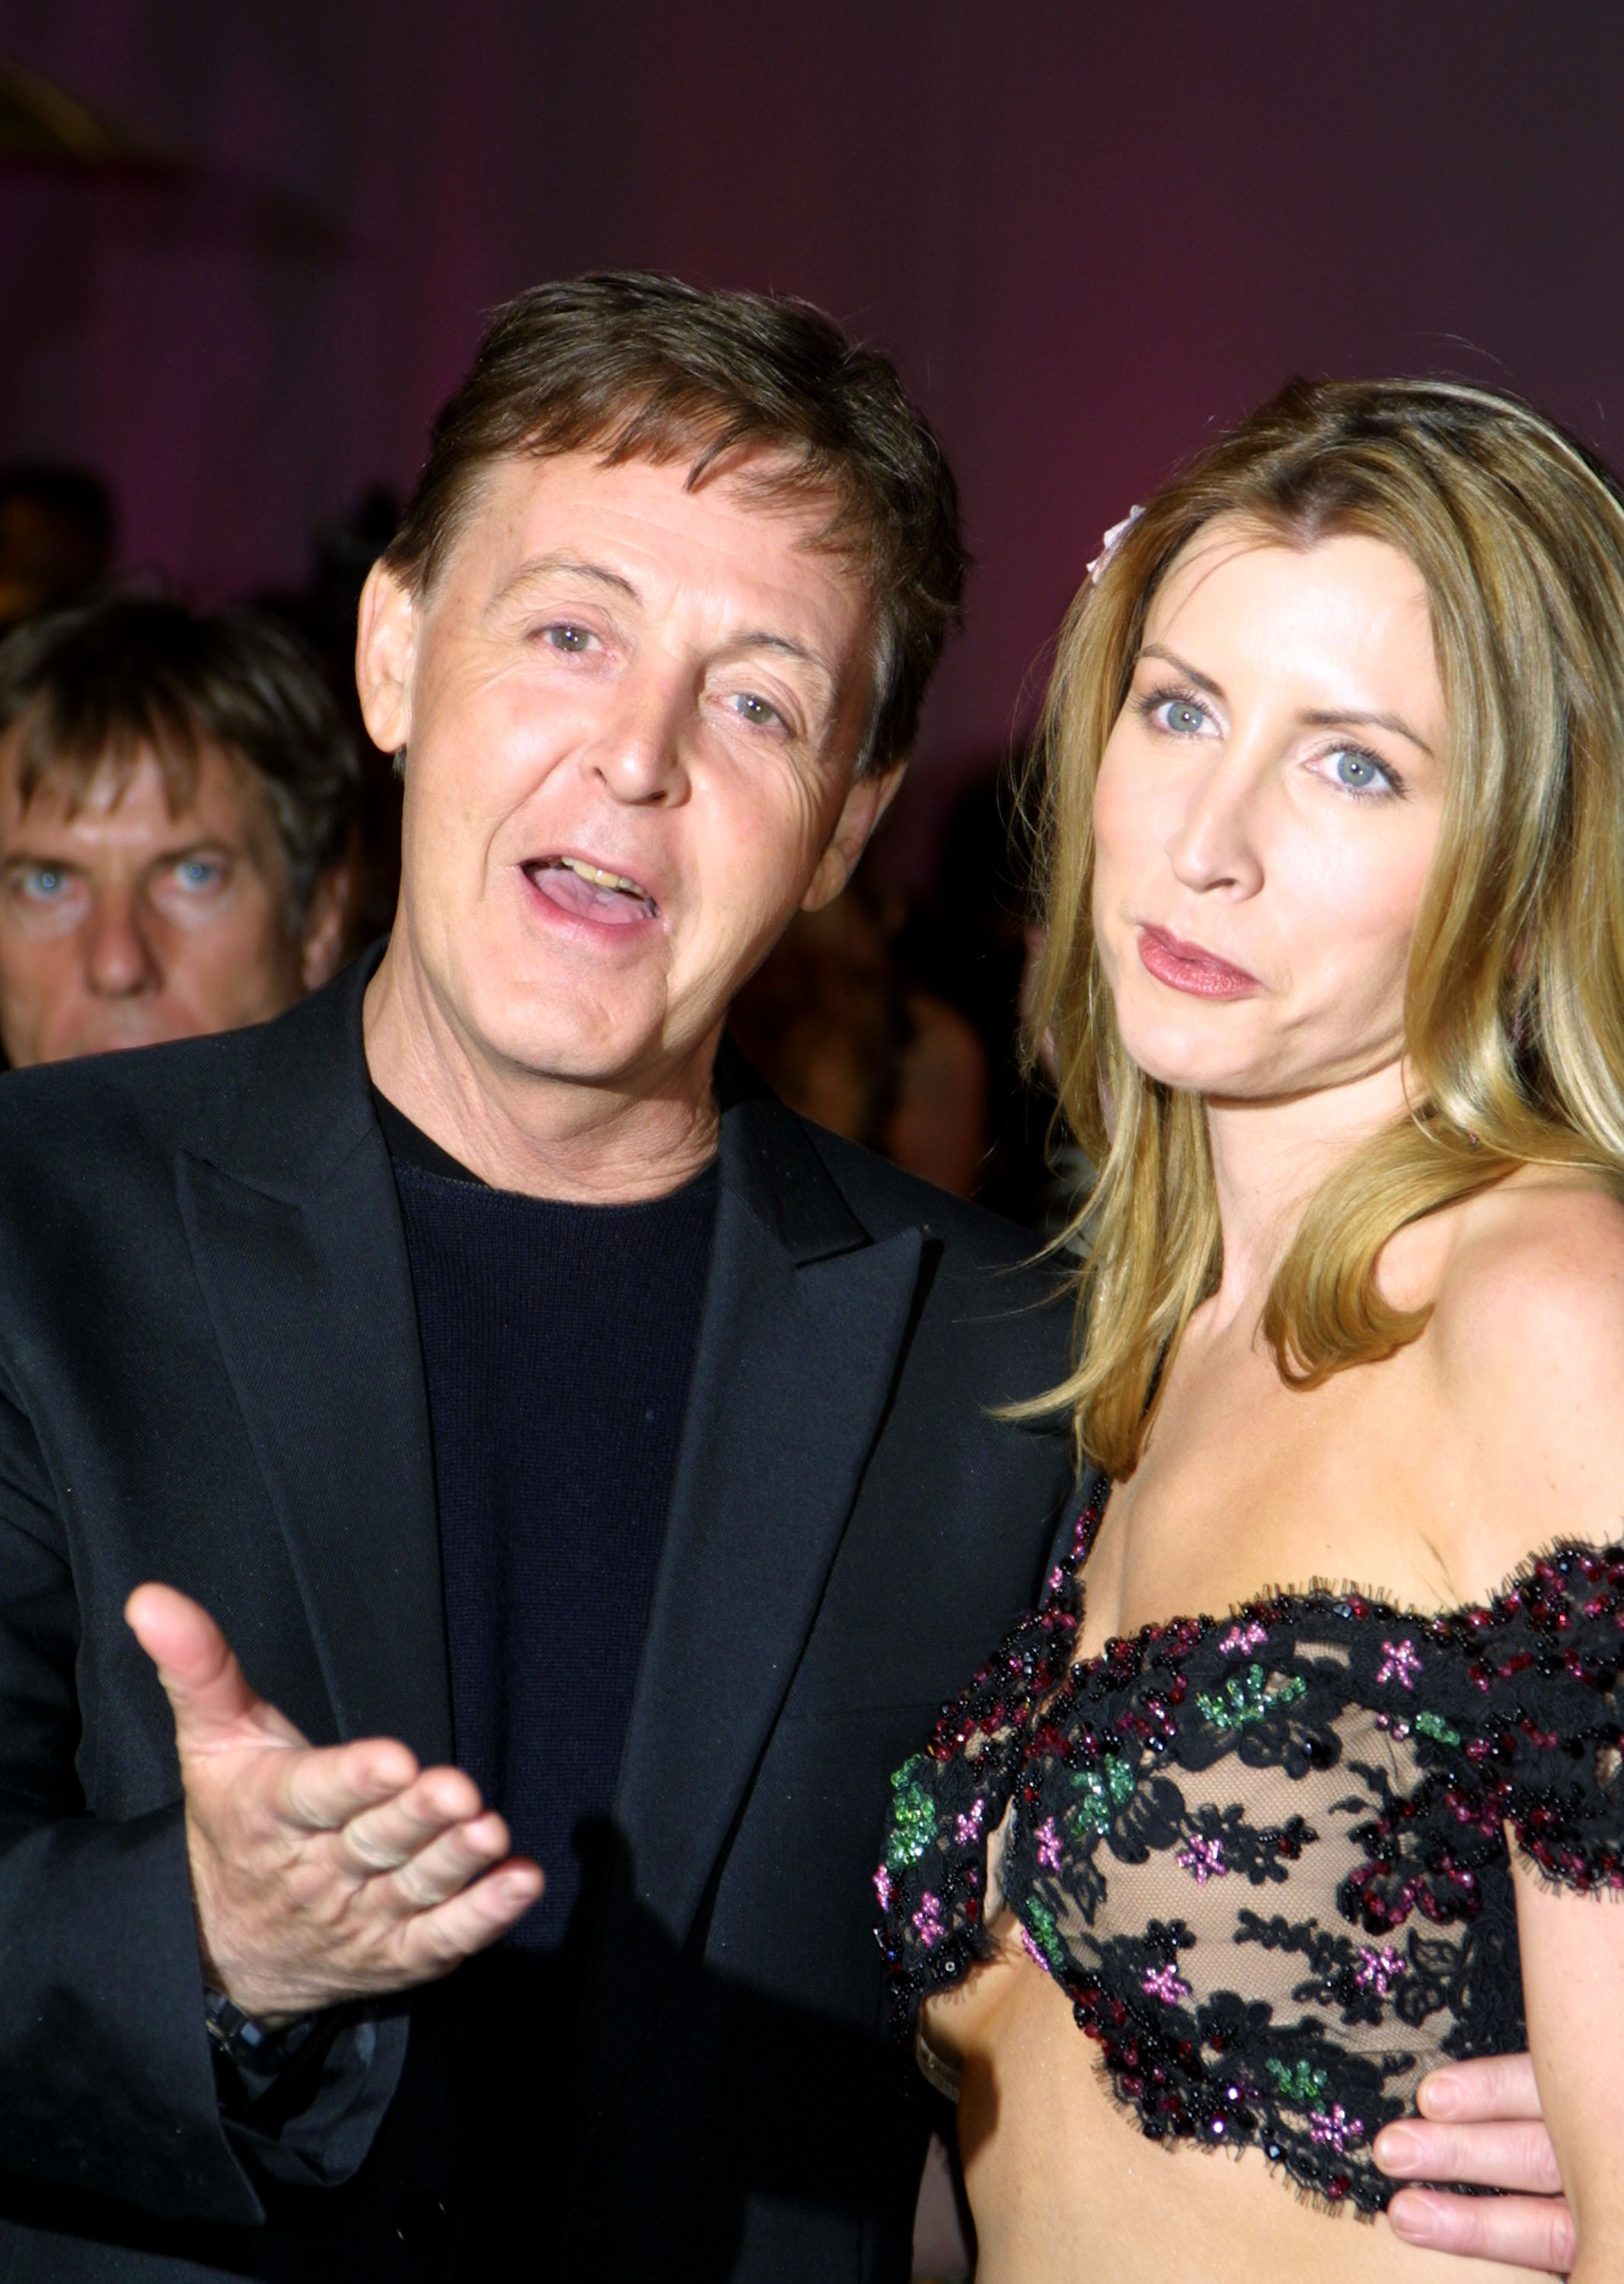 Paul McCartney and Heather Mills attend the 2002 Vanity Fair Oscar Party on March 24, 2002 in Beverly Hills, California | Source: Getty Images